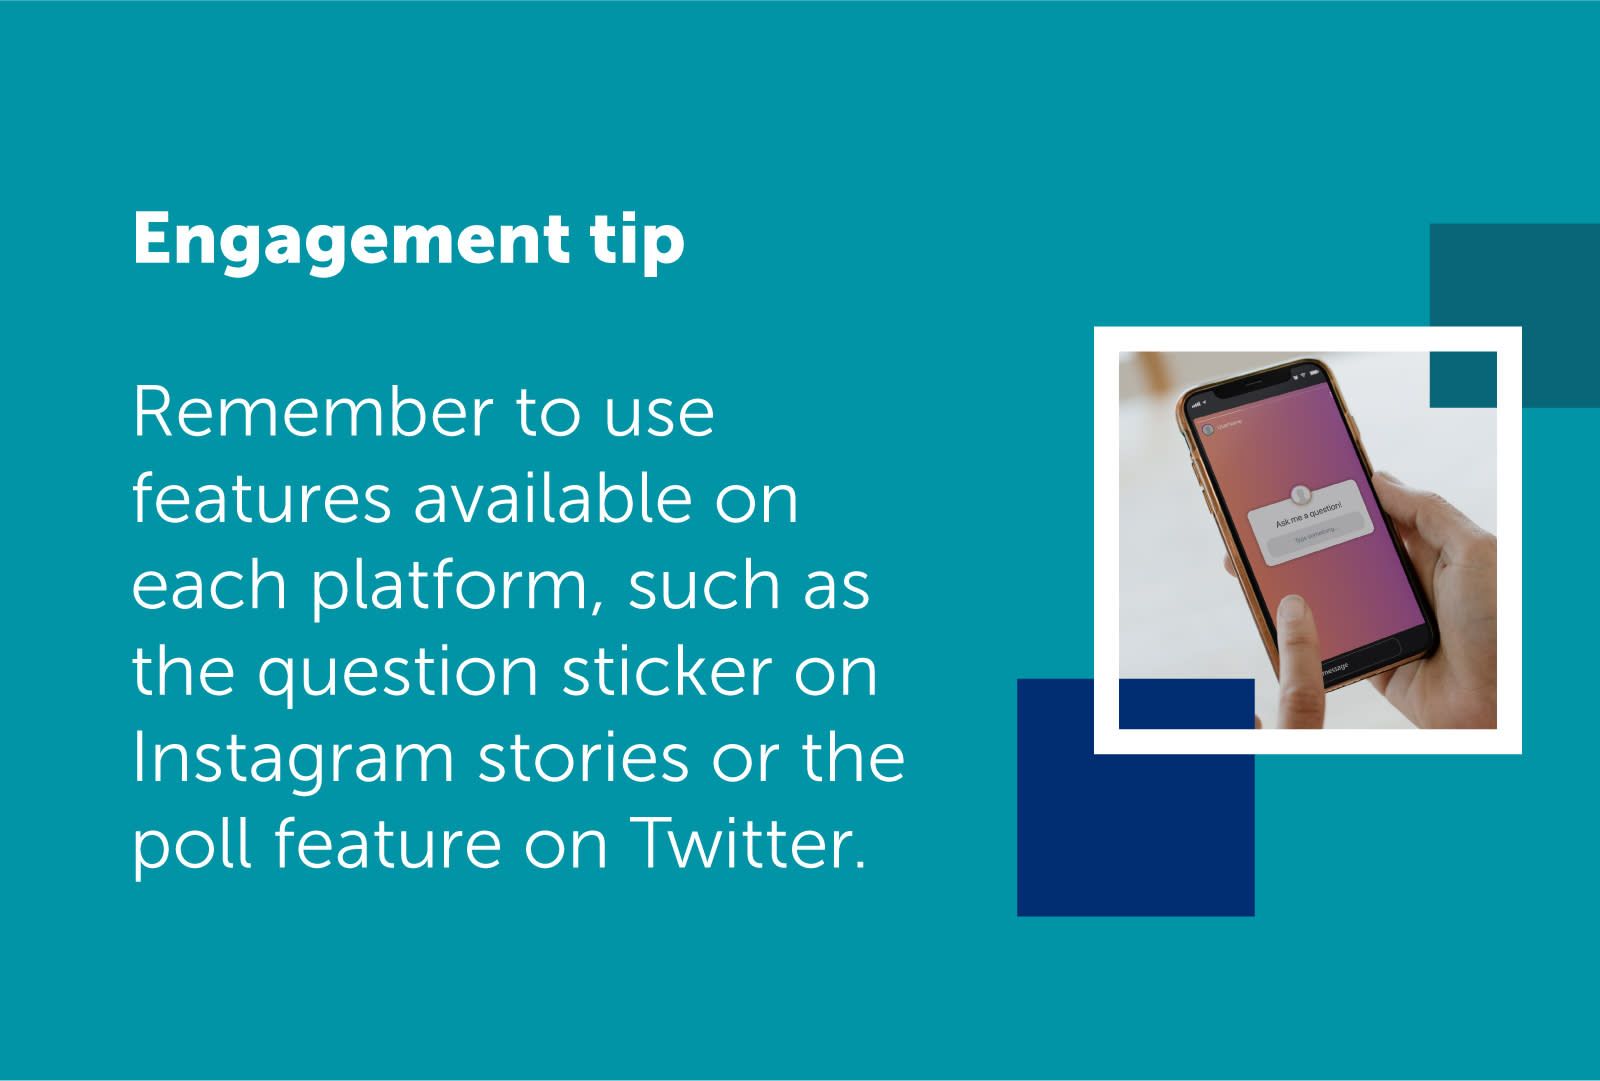 Text on image reads: Remember to use features available on each platform, such as the question sticker on Instagram stories or the poll feature on Twitter. 